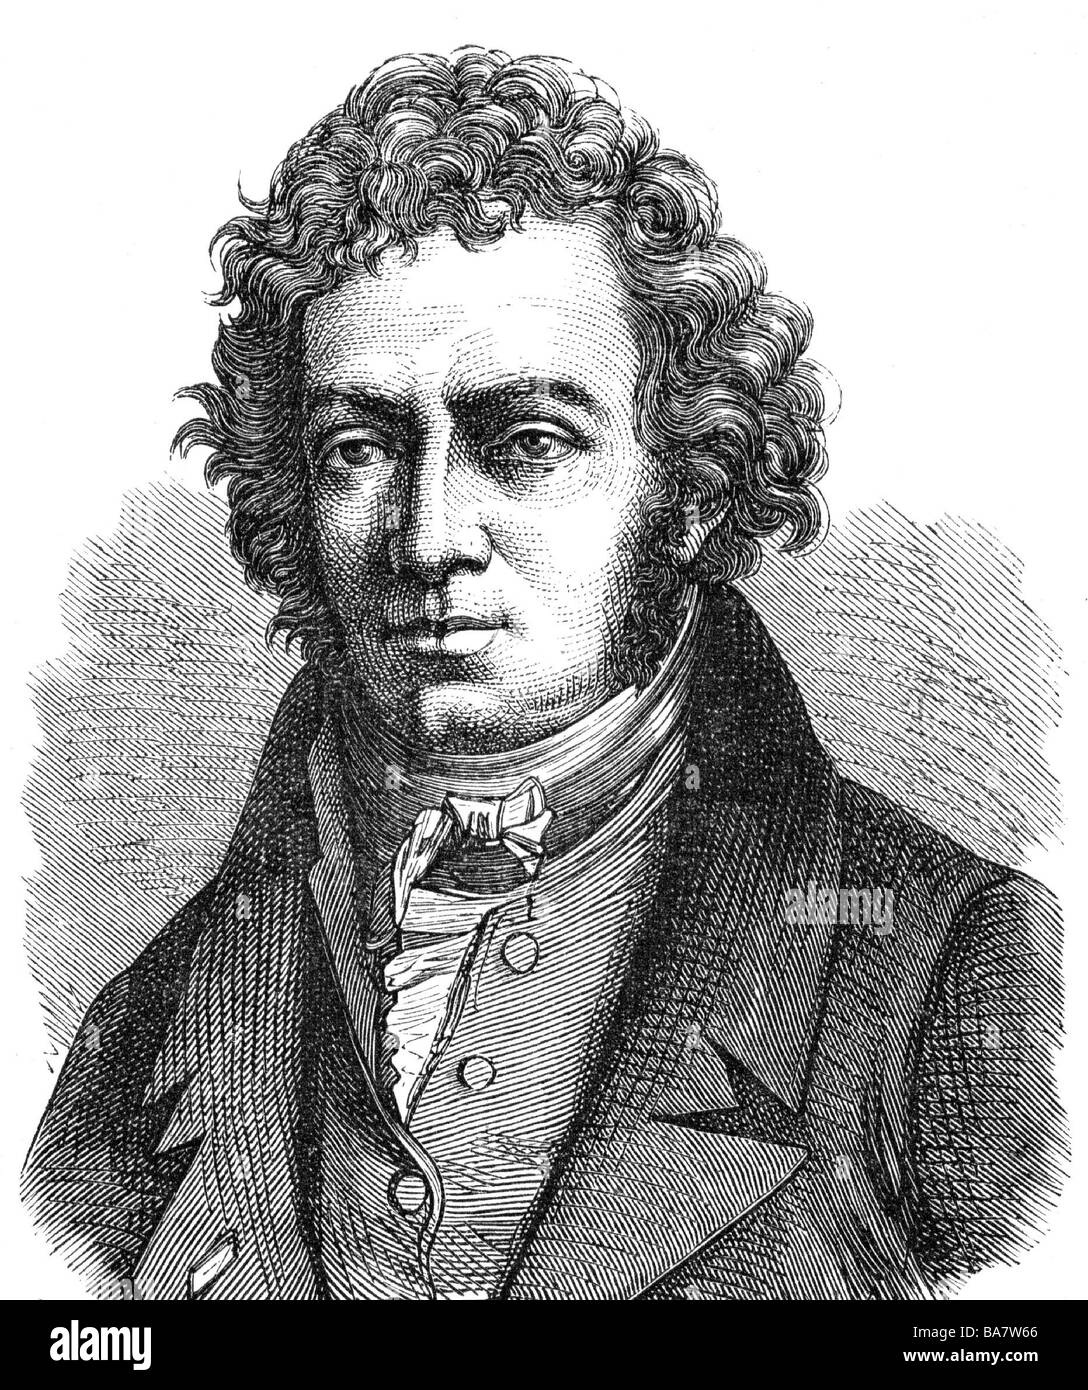 Ampere, Andre, 22.1.1775 - 10.6.1836, French scientist (physicist and mathematician), portrait, wood engraving, 19th century, Stock Photo